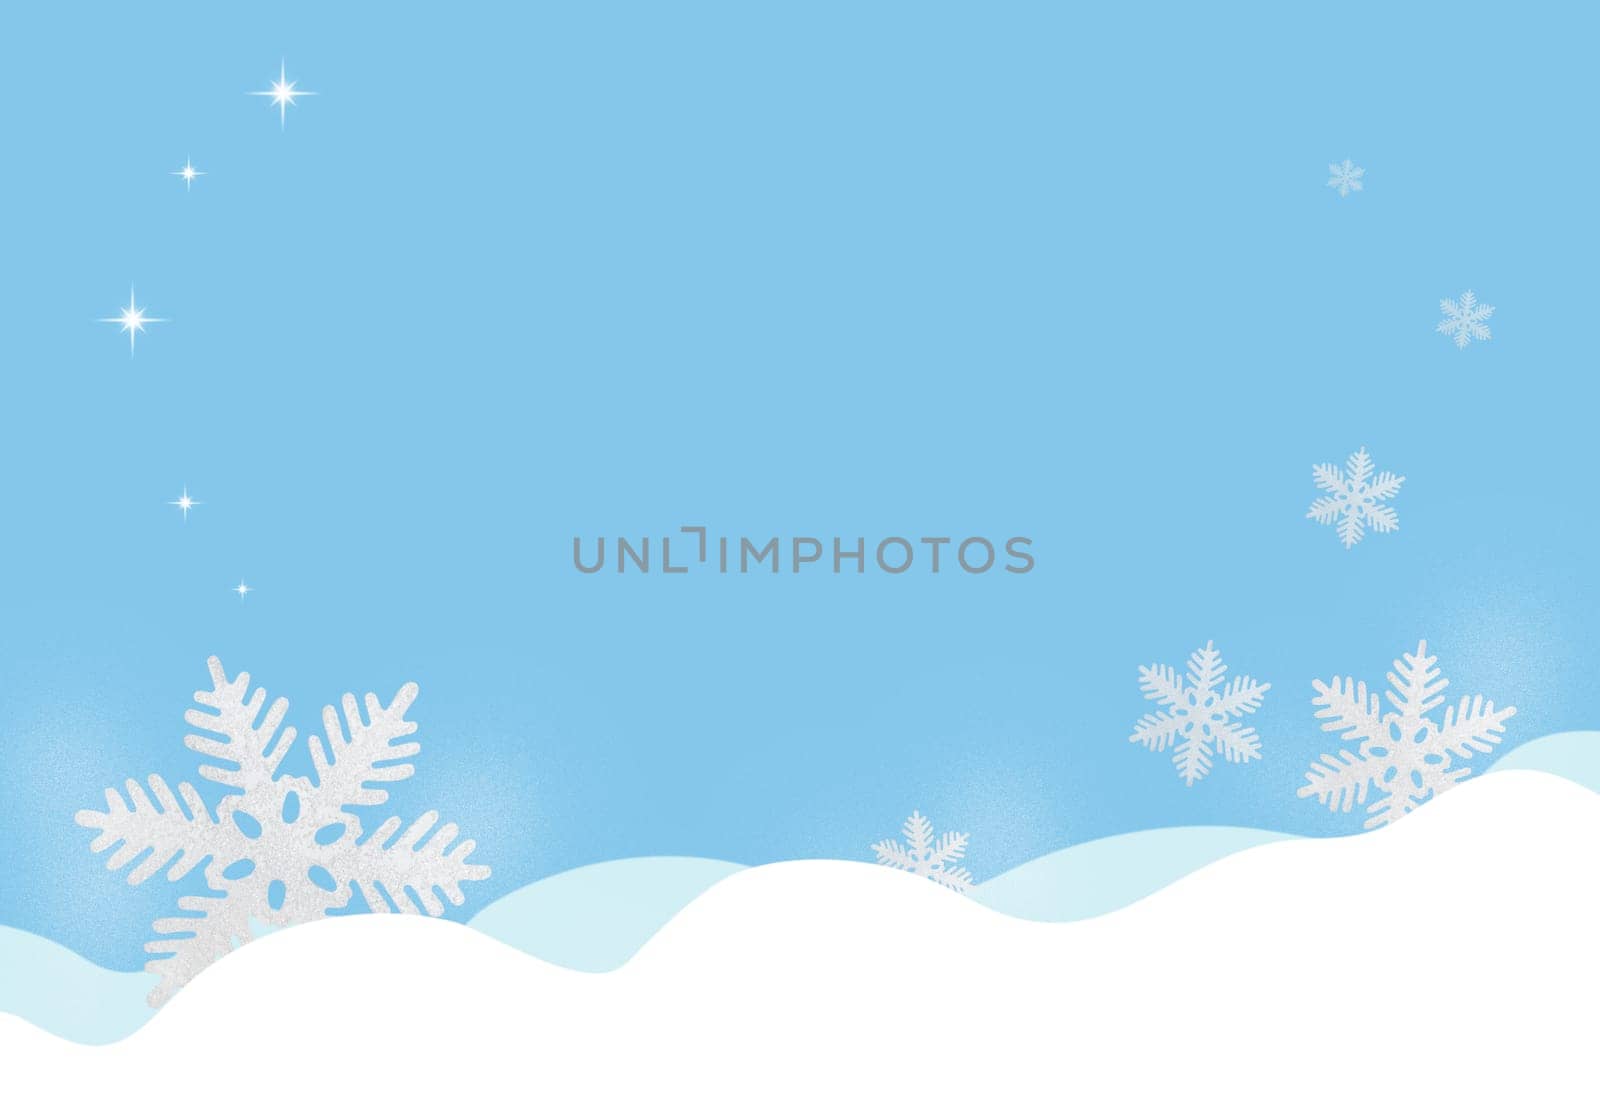 Blue Christmas background with snowflakes and stars. Copy space